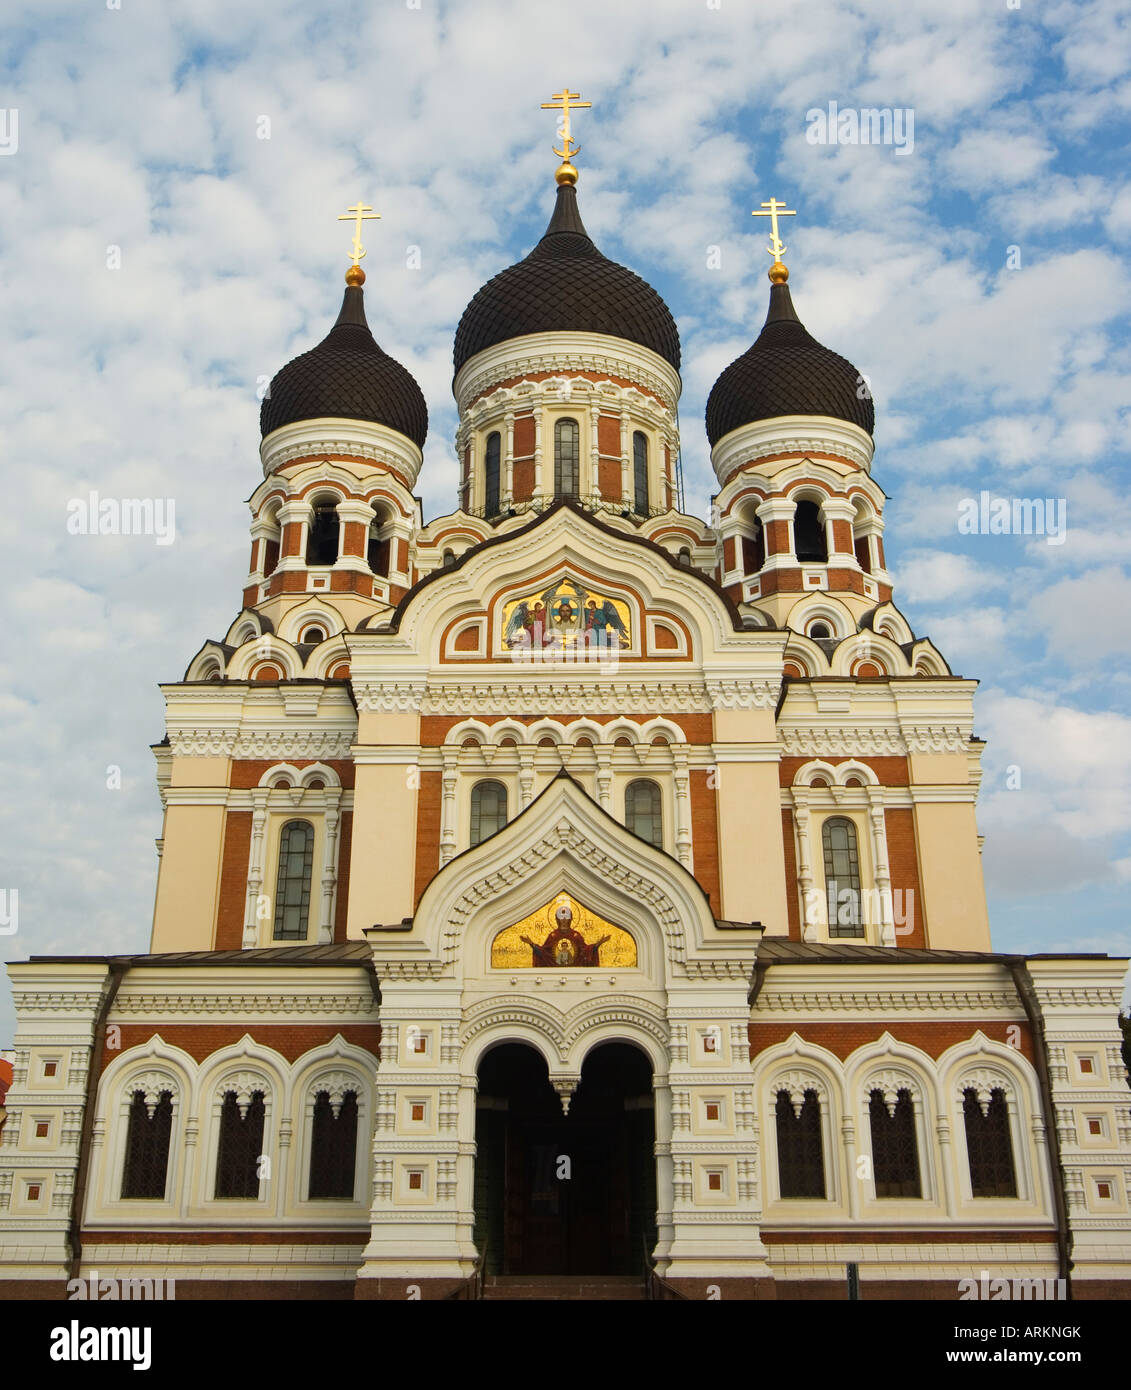 The 19th century Russian Orthodox Alexander Nevsky Cathedral on Toompea, Old Town,Tallinn, Estonia, Baltic States Stock Photo